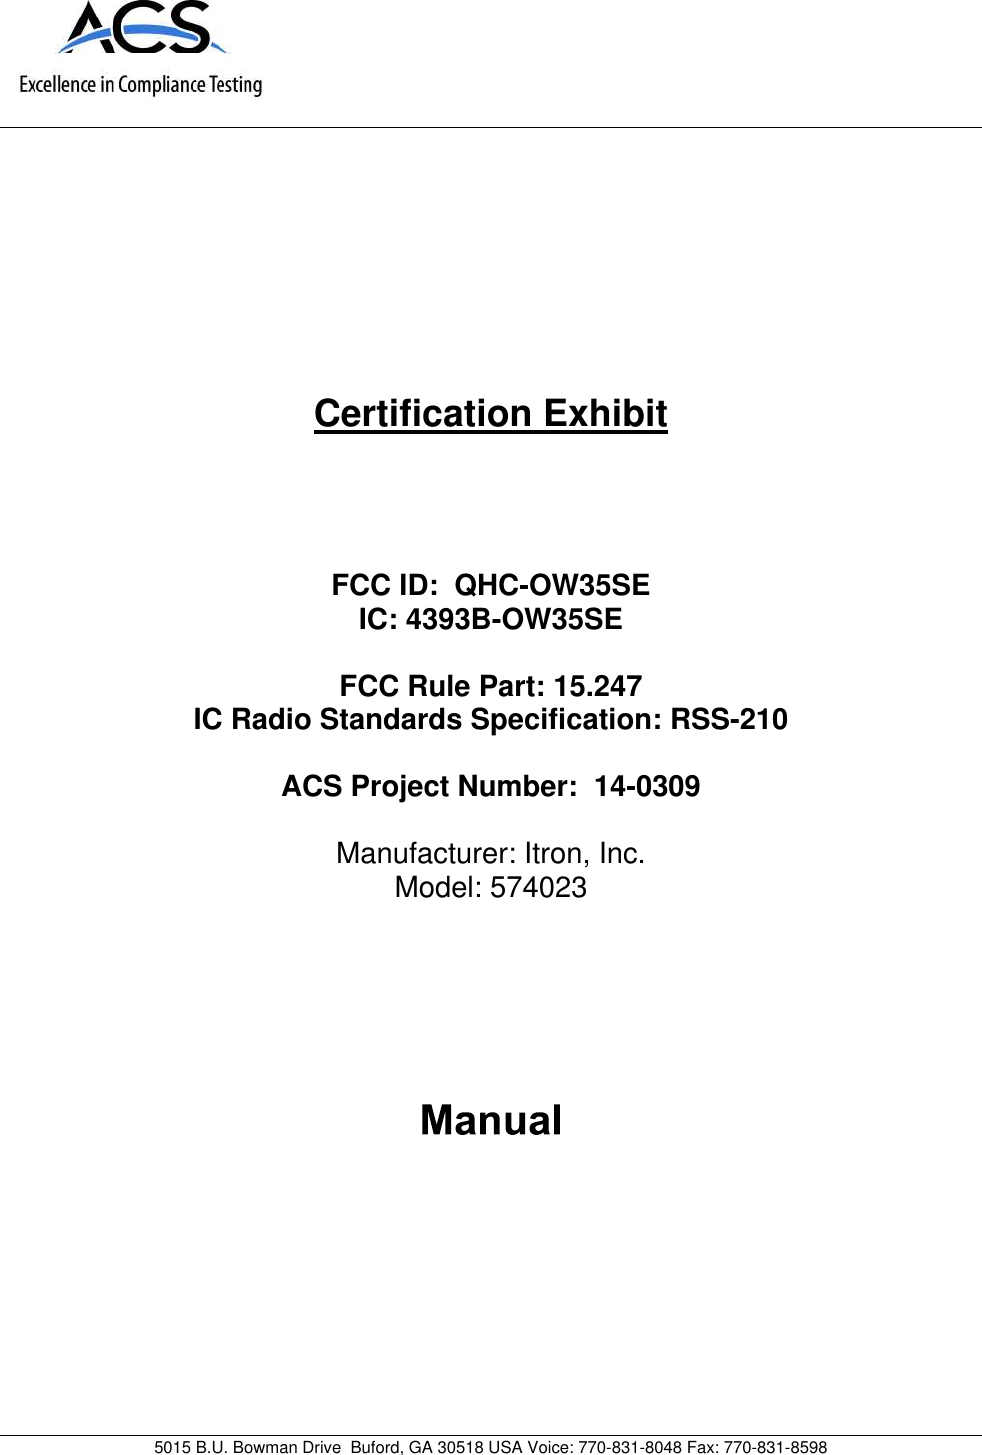 5015 B.U. Bowman Drive Buford, GA 30518 USA Voice: 770-831-8048 Fax: 770-831-8598Certification ExhibitFCC ID: QHC-OW35SEIC: 4393B-OW35SEFCC Rule Part: 15.247IC Radio Standards Specification: RSS-210ACS Project Number: 14-0309Manufacturer: Itron, Inc.Model: 574023